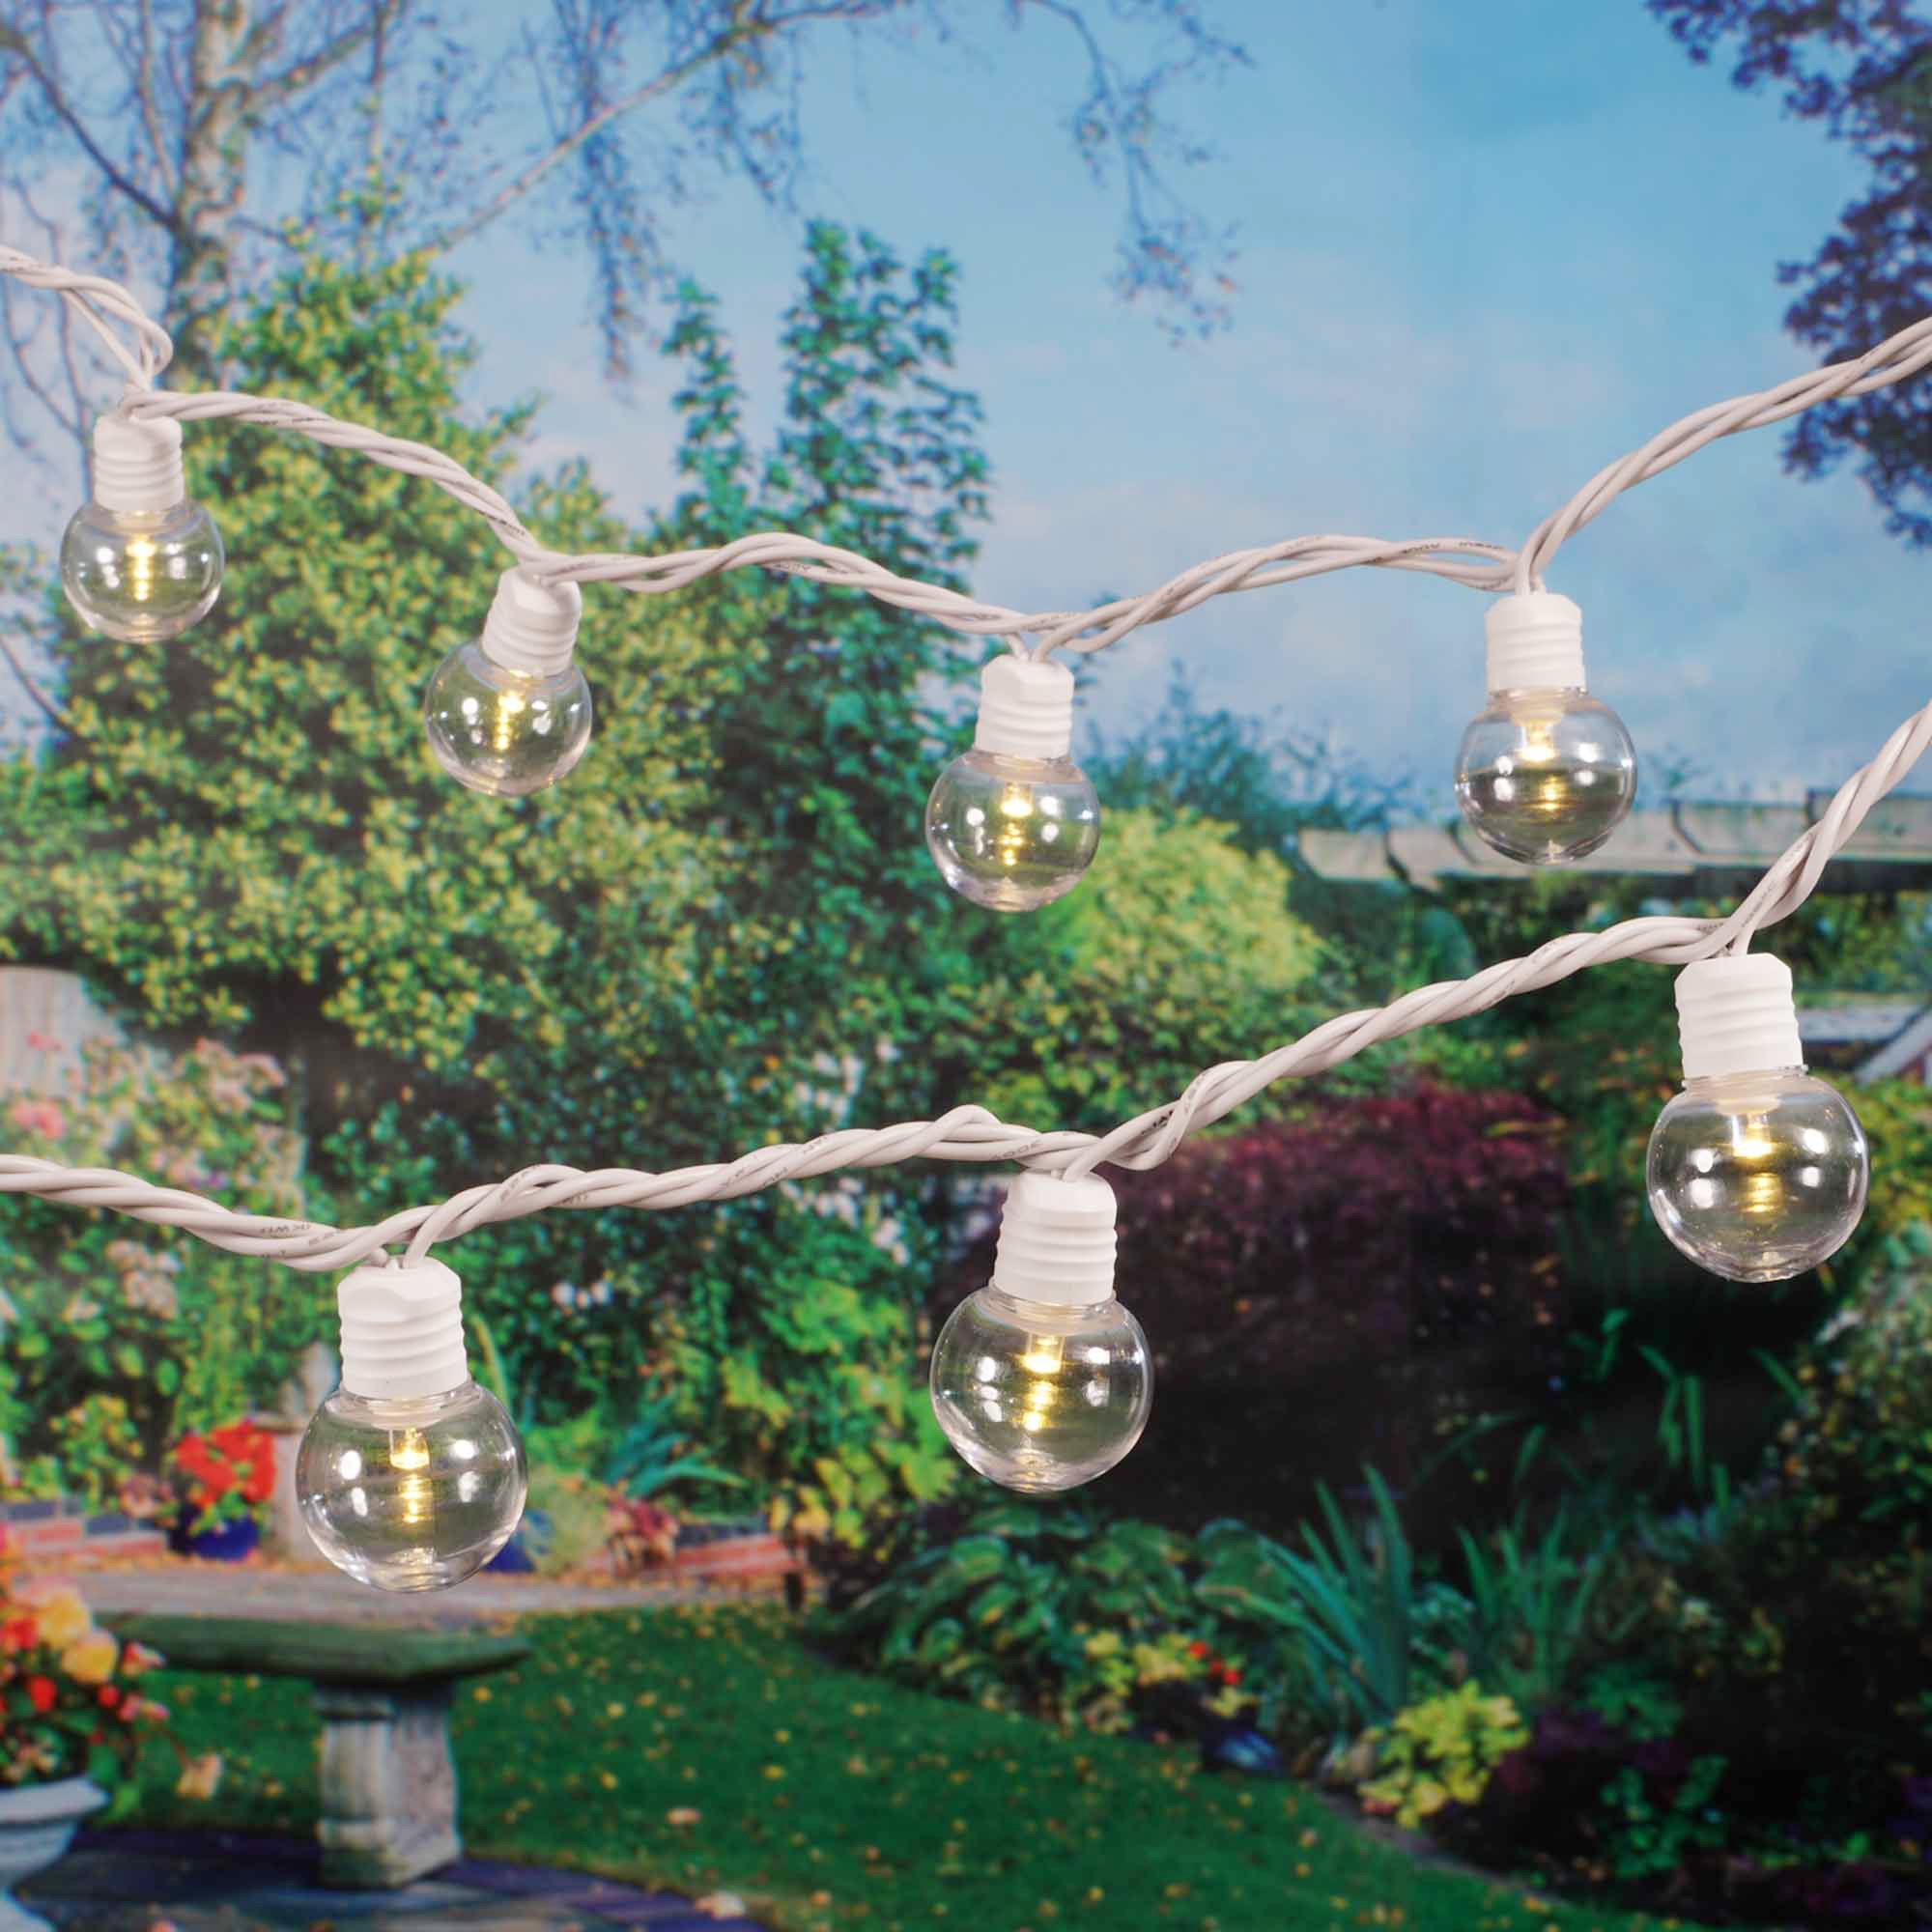 Mainstays 100-Count Plastic LED Globe Outdoor String Lights - image 3 of 9